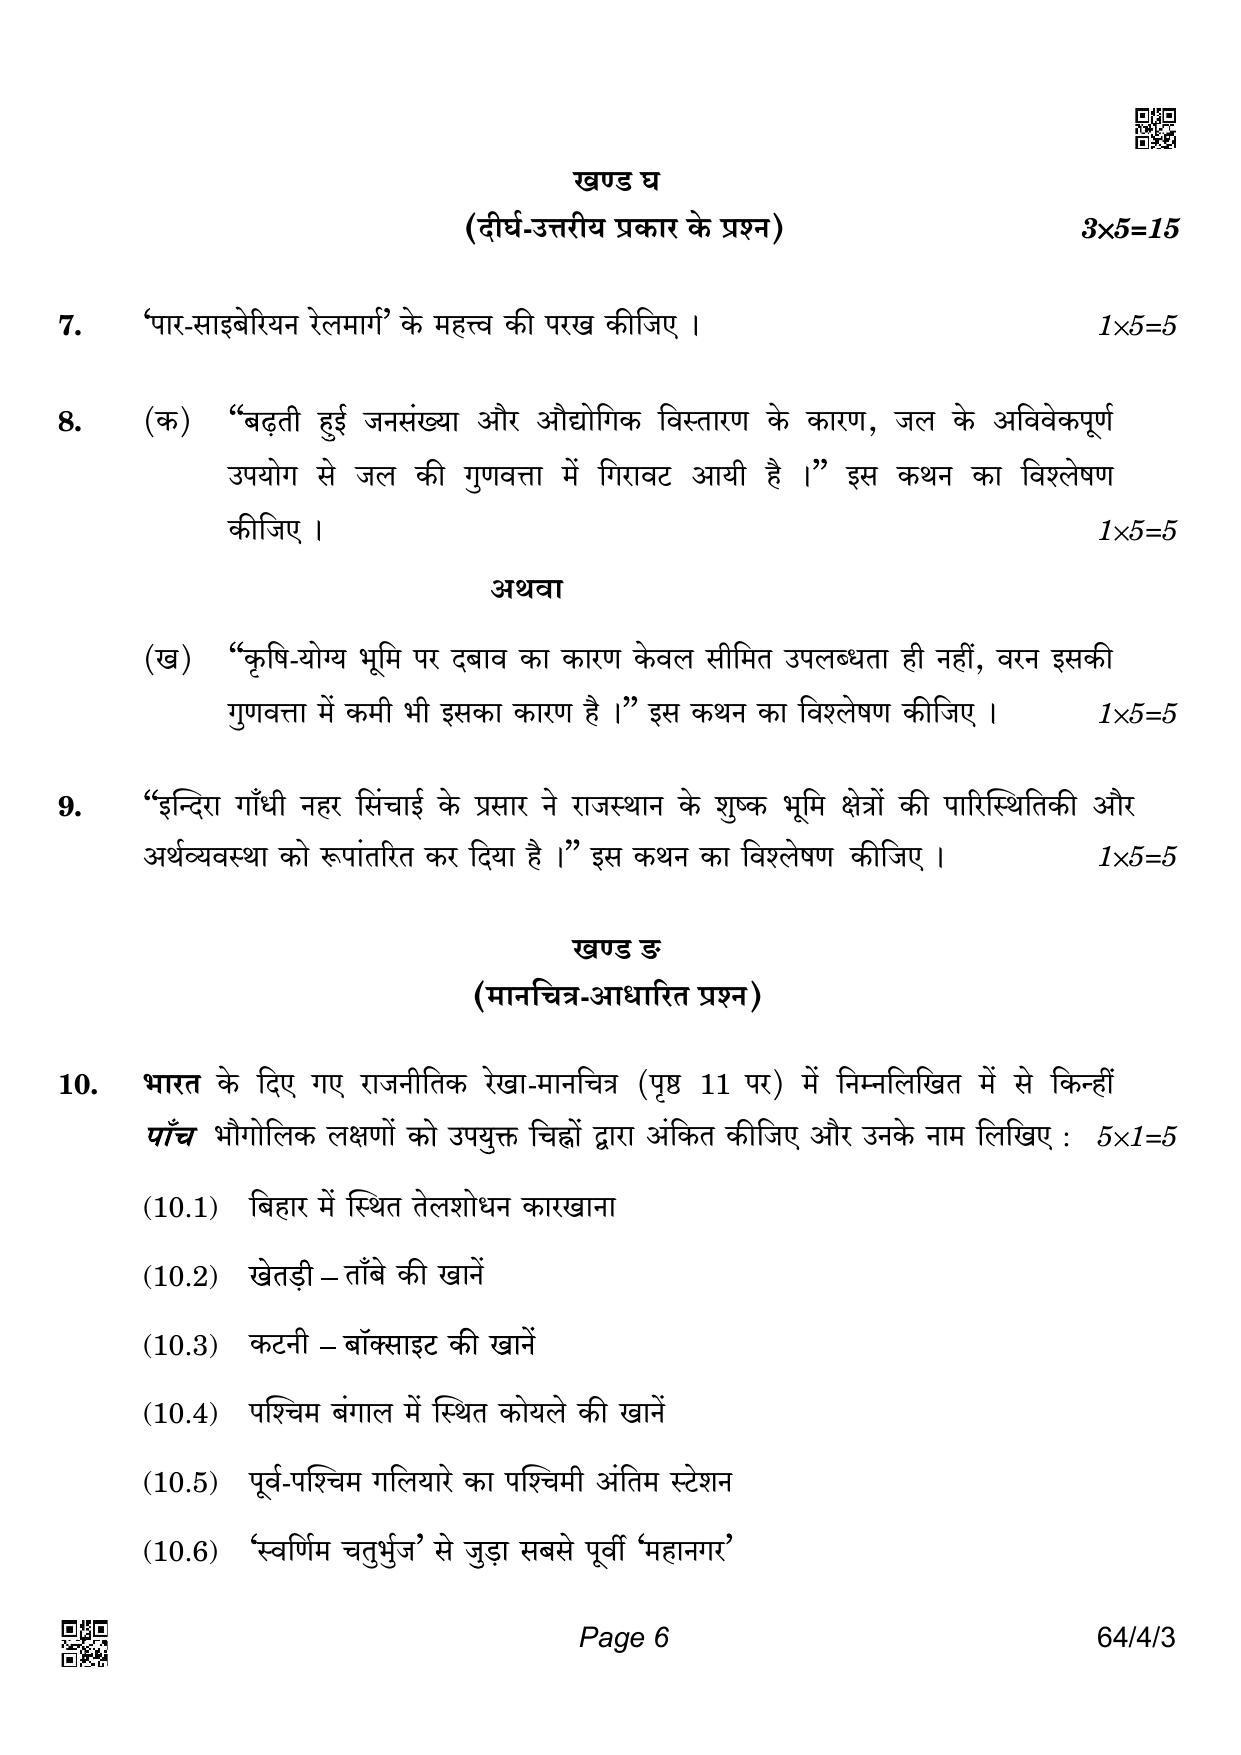 CBSE Class 12 64-4-3 Geography 2022 Question Paper - Page 6